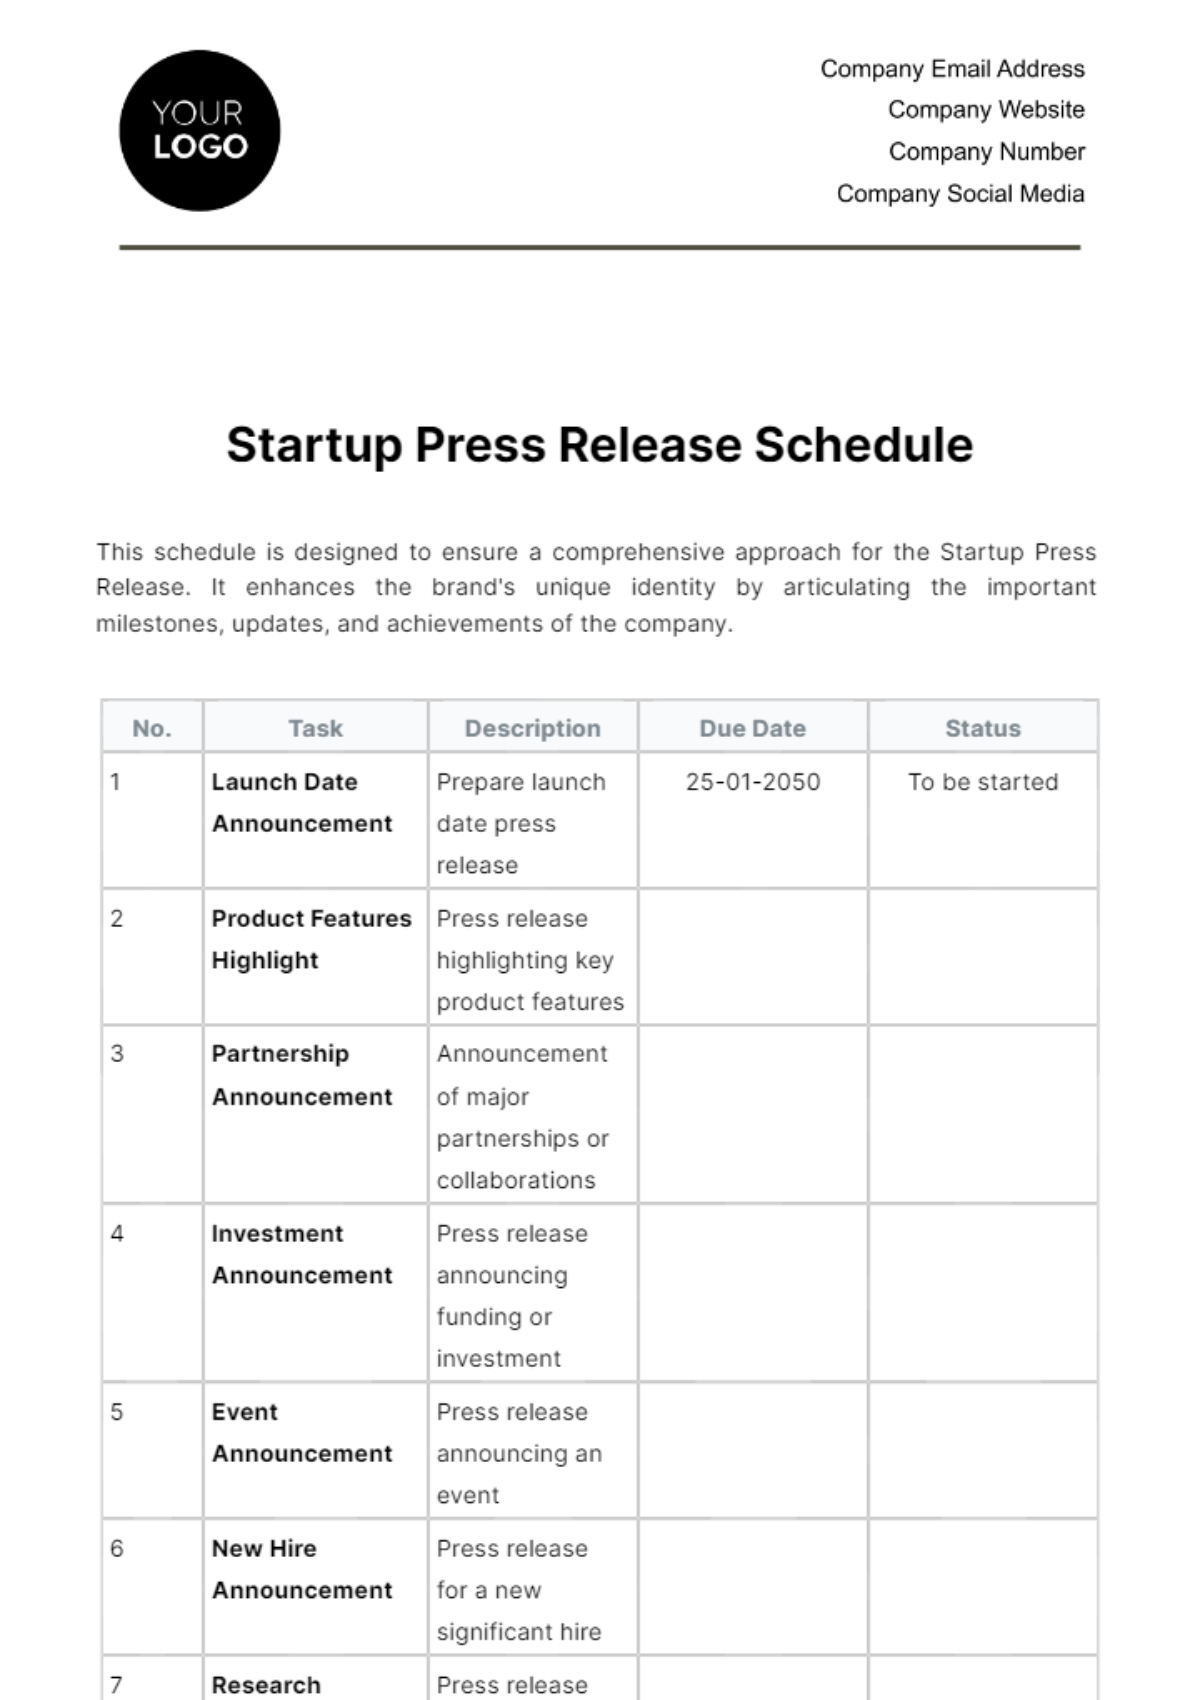 Free Startup Press Release Schedule Template